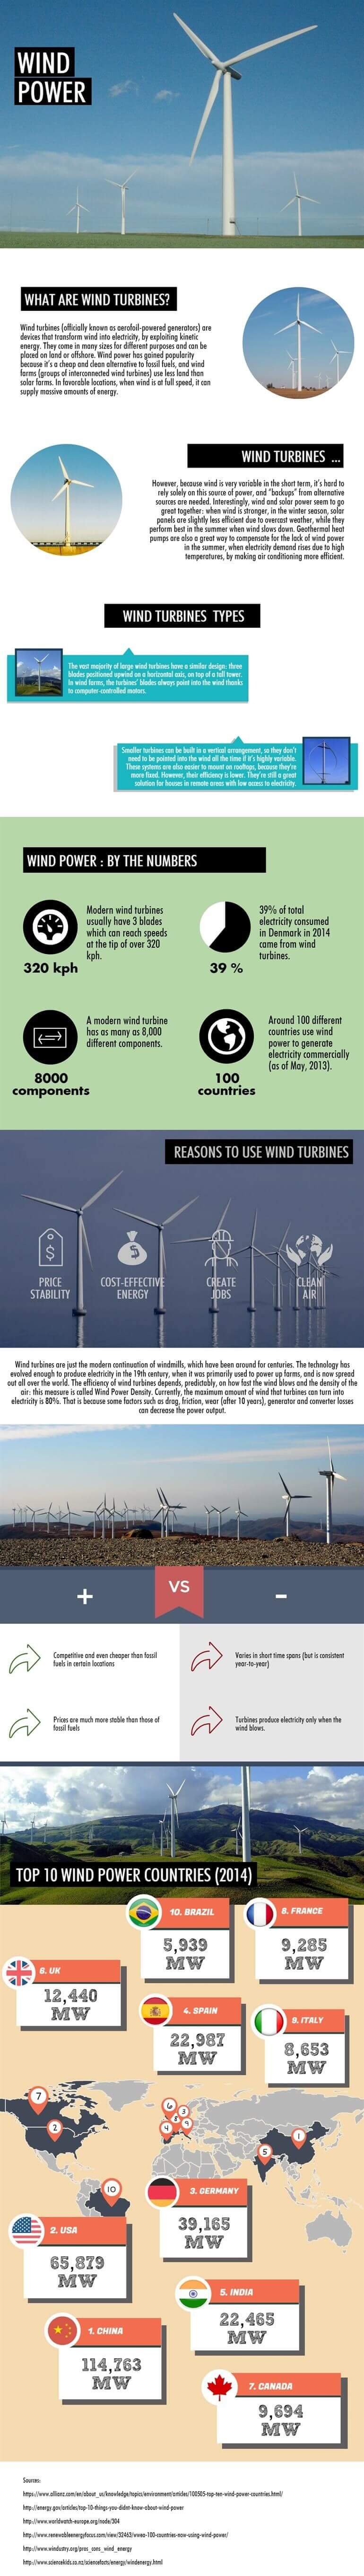 Infographic about wind power